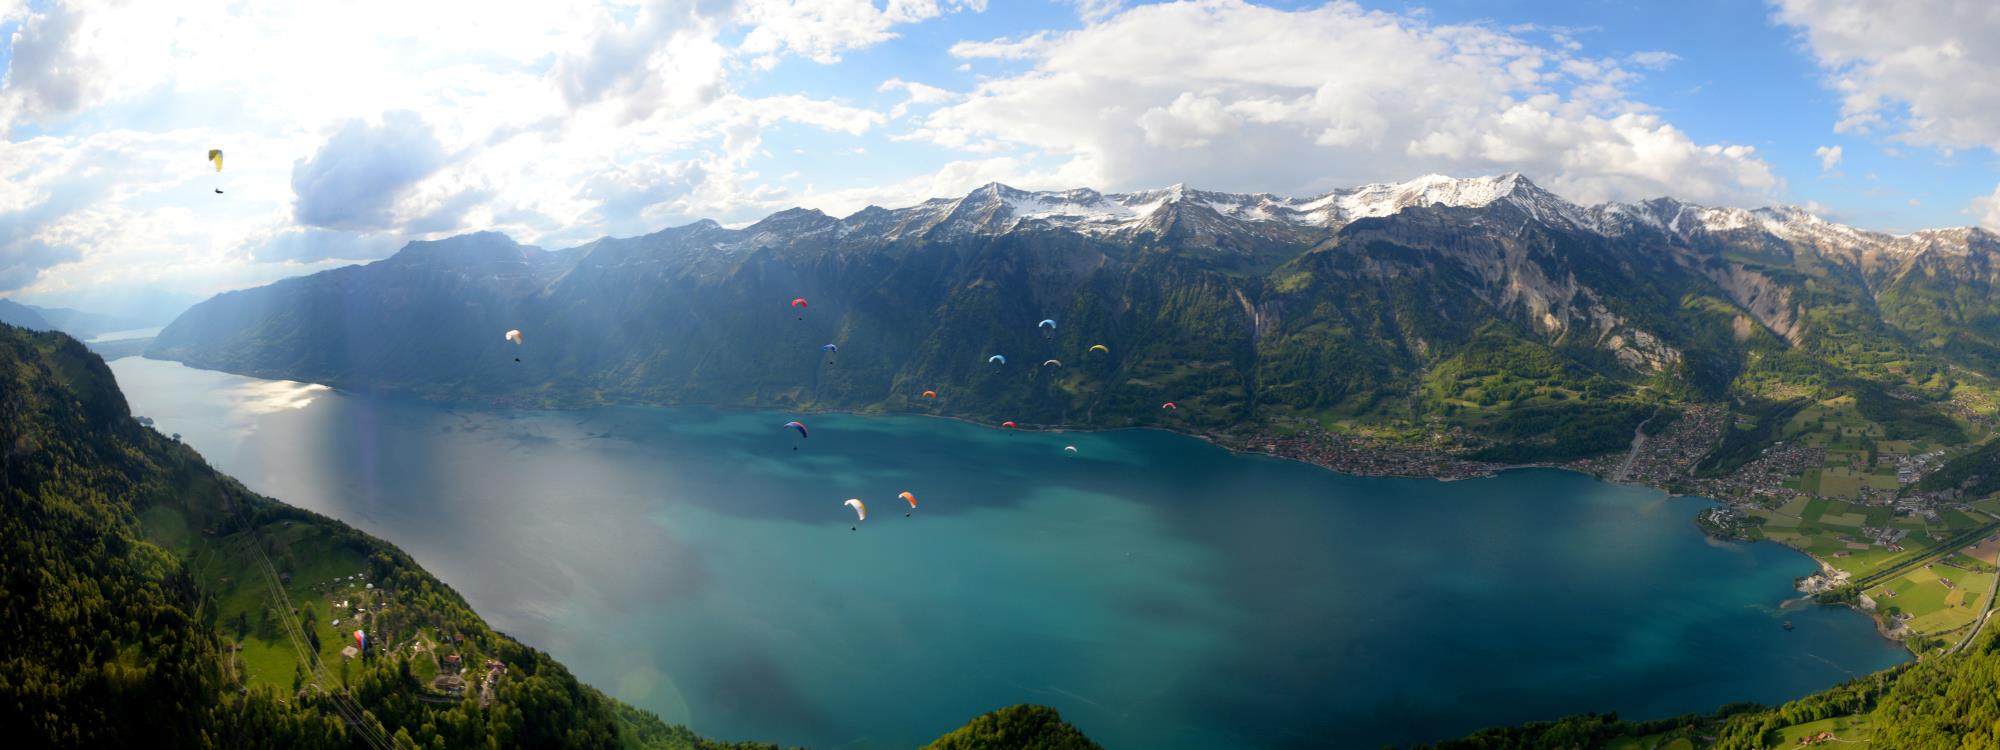 PARAGLIDING AND HANGGLIDING